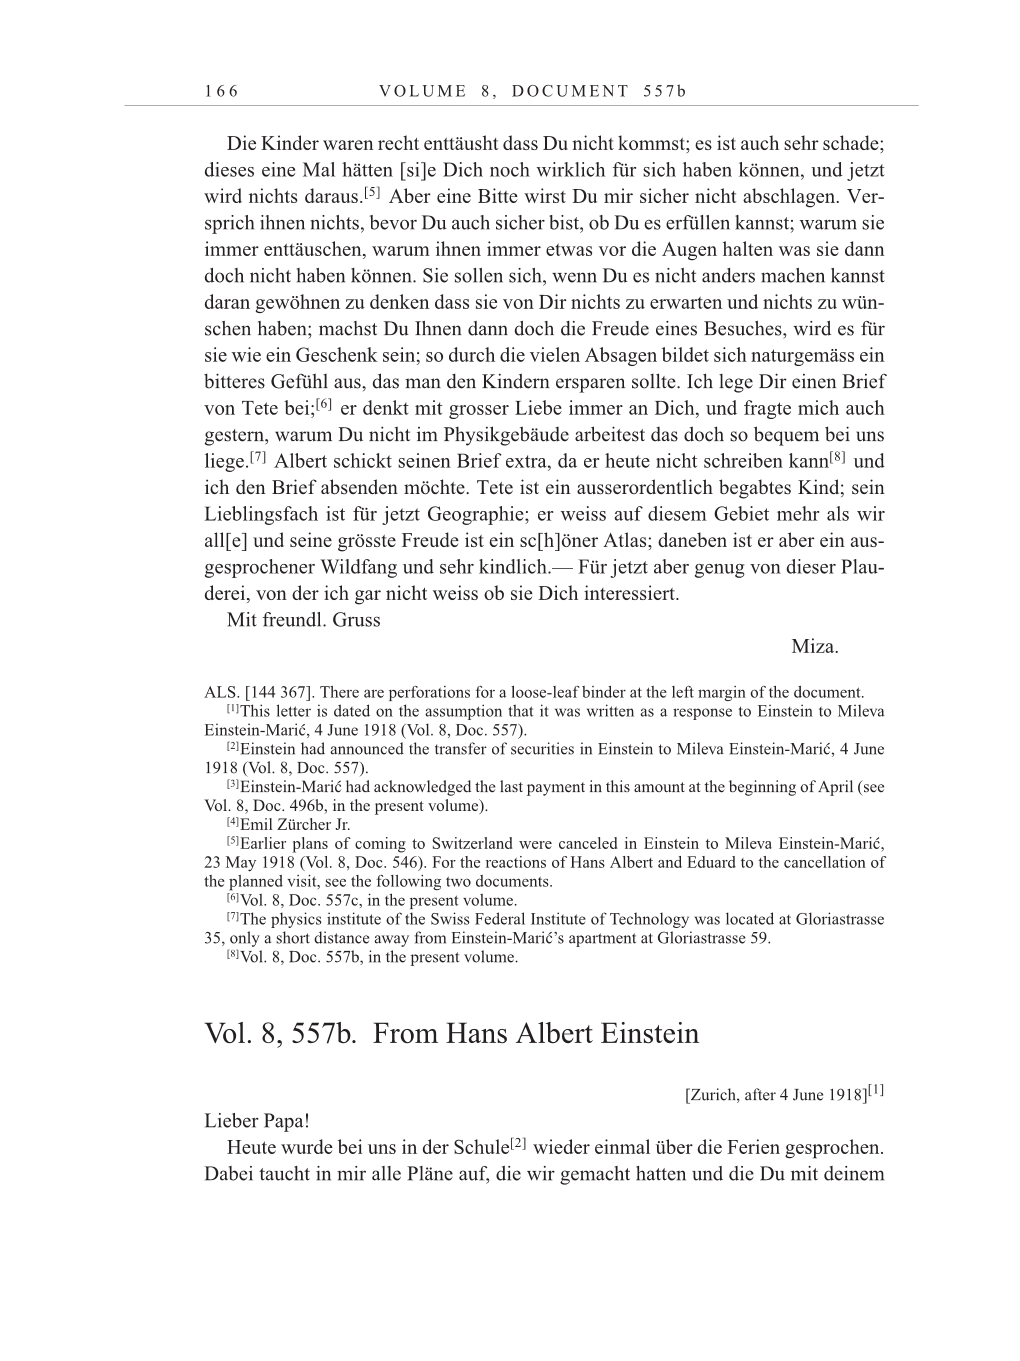 Volume 10: The Berlin Years: Correspondence May-December 1920 / Supplementary Correspondence 1909-1920 page 166